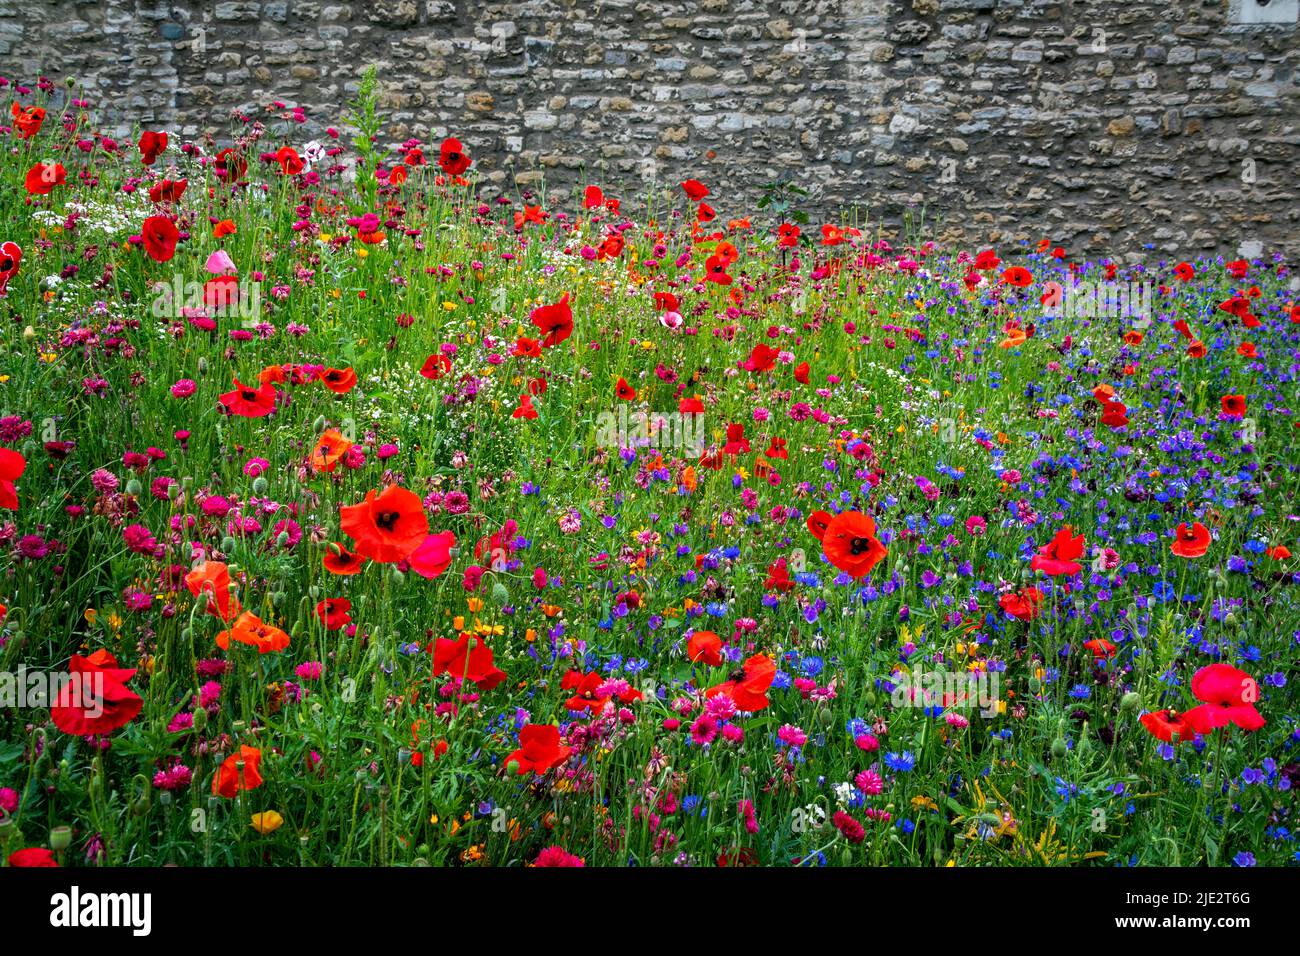 Summer wild flower 'Superbloom' display in the moat at The Tower of London, England celebrating the platinum jubilee year of HM The Queen. Stock Photo